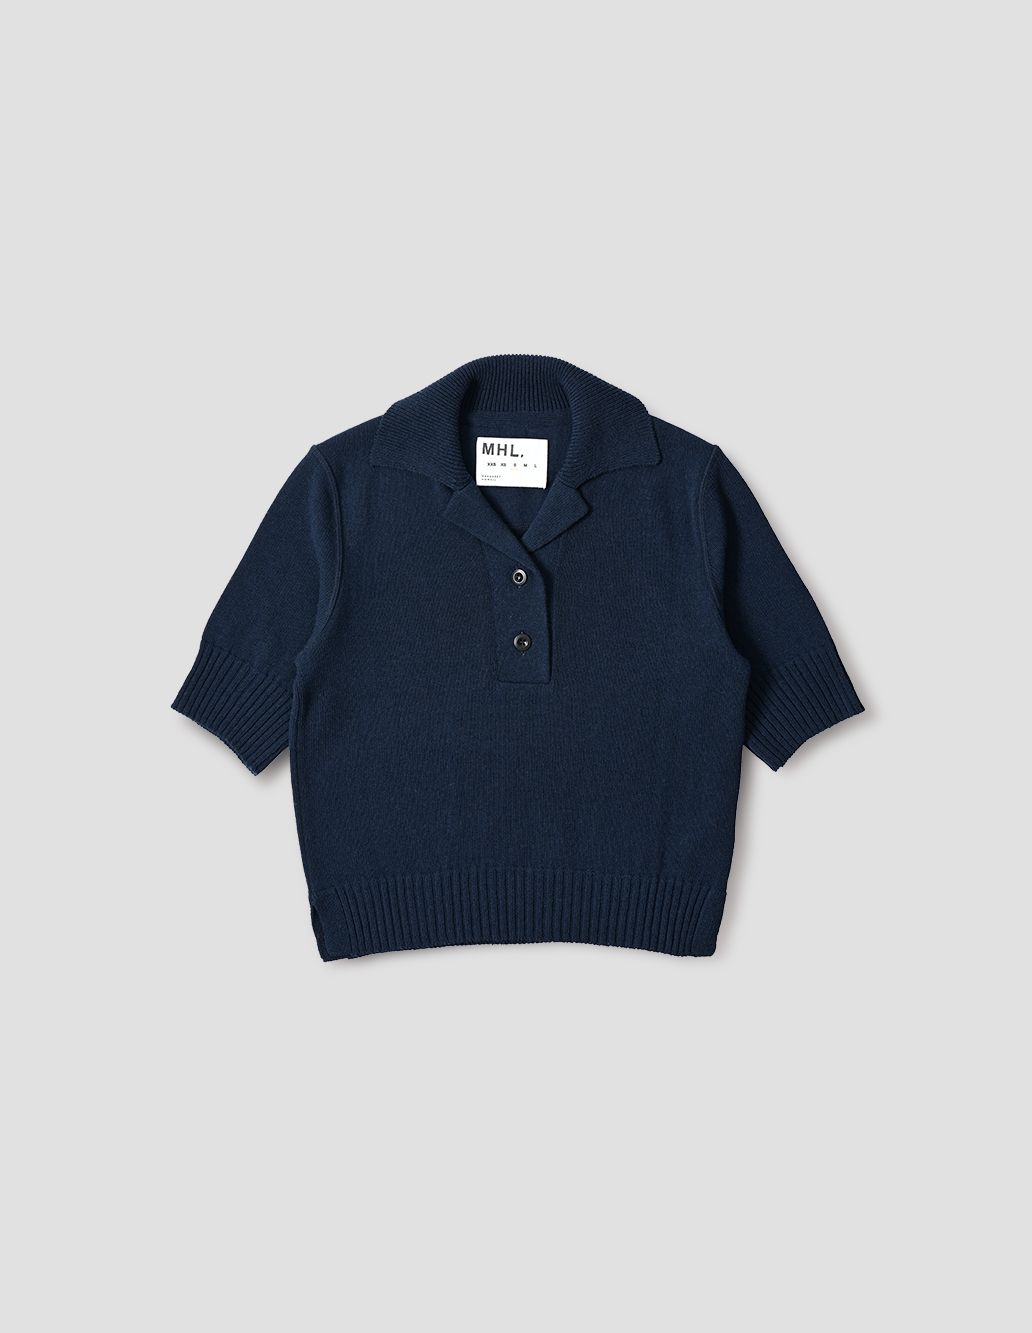 MARGARET HOWELL - Indigo cotton wool polo | MHL. by Margaret Howell